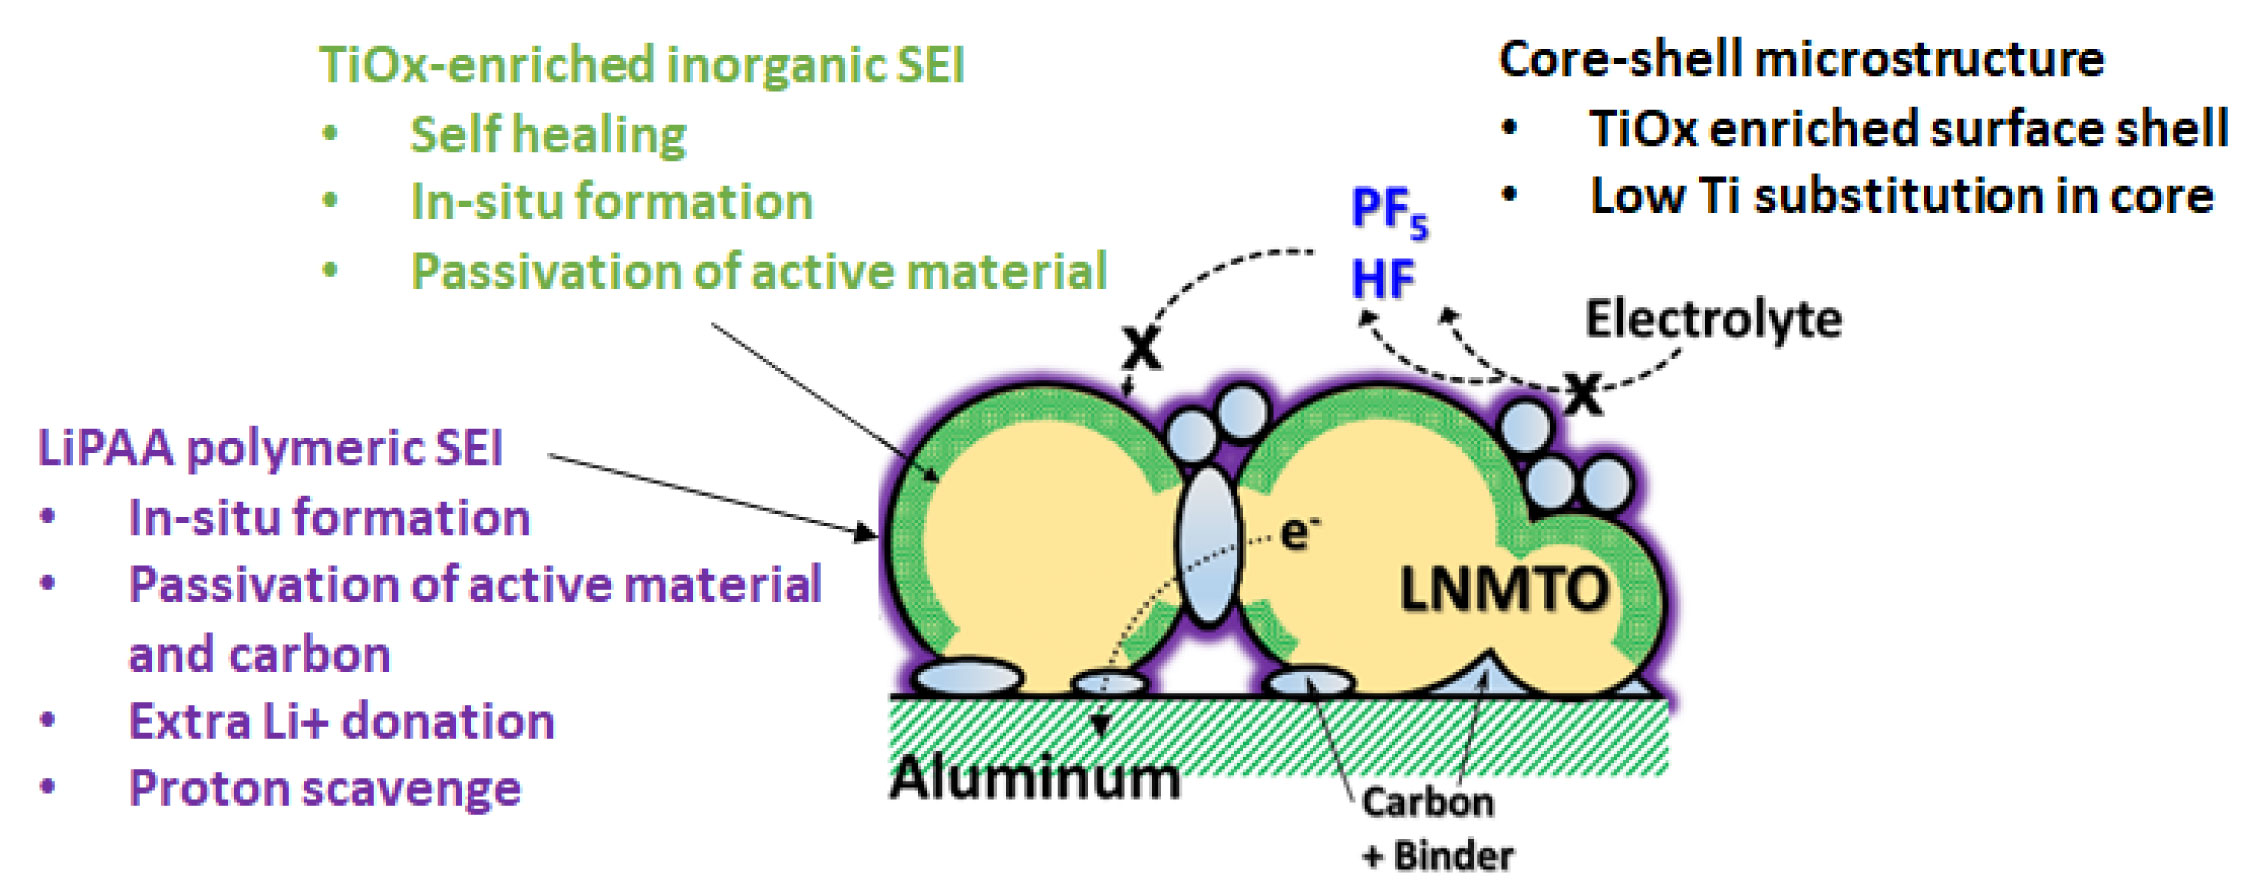 Cathode Active material. Activity material